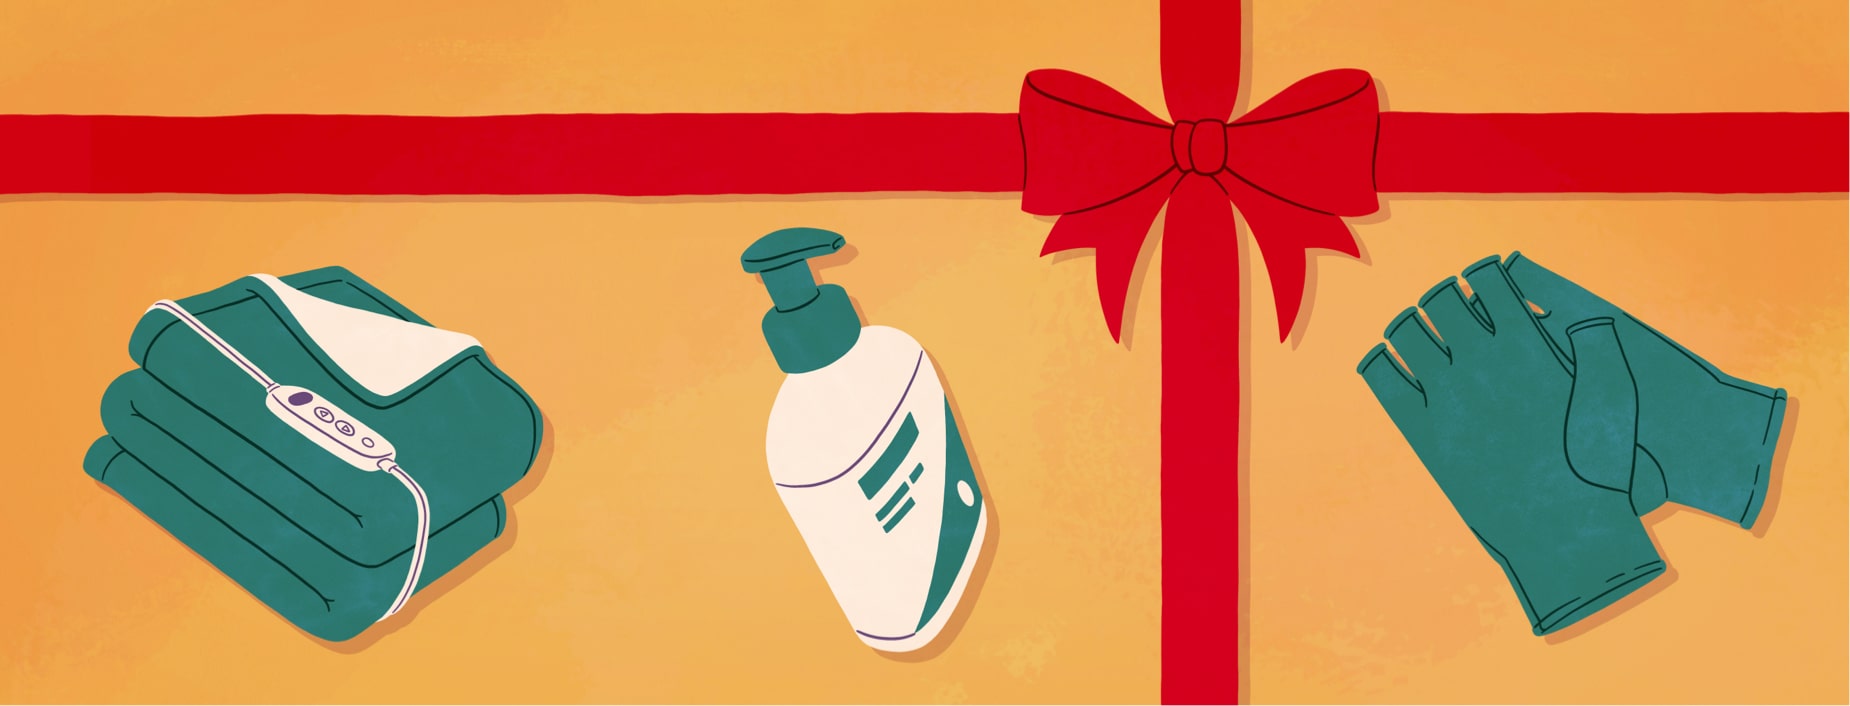 A Holiday Gift Guide For Those With Psoriasis image